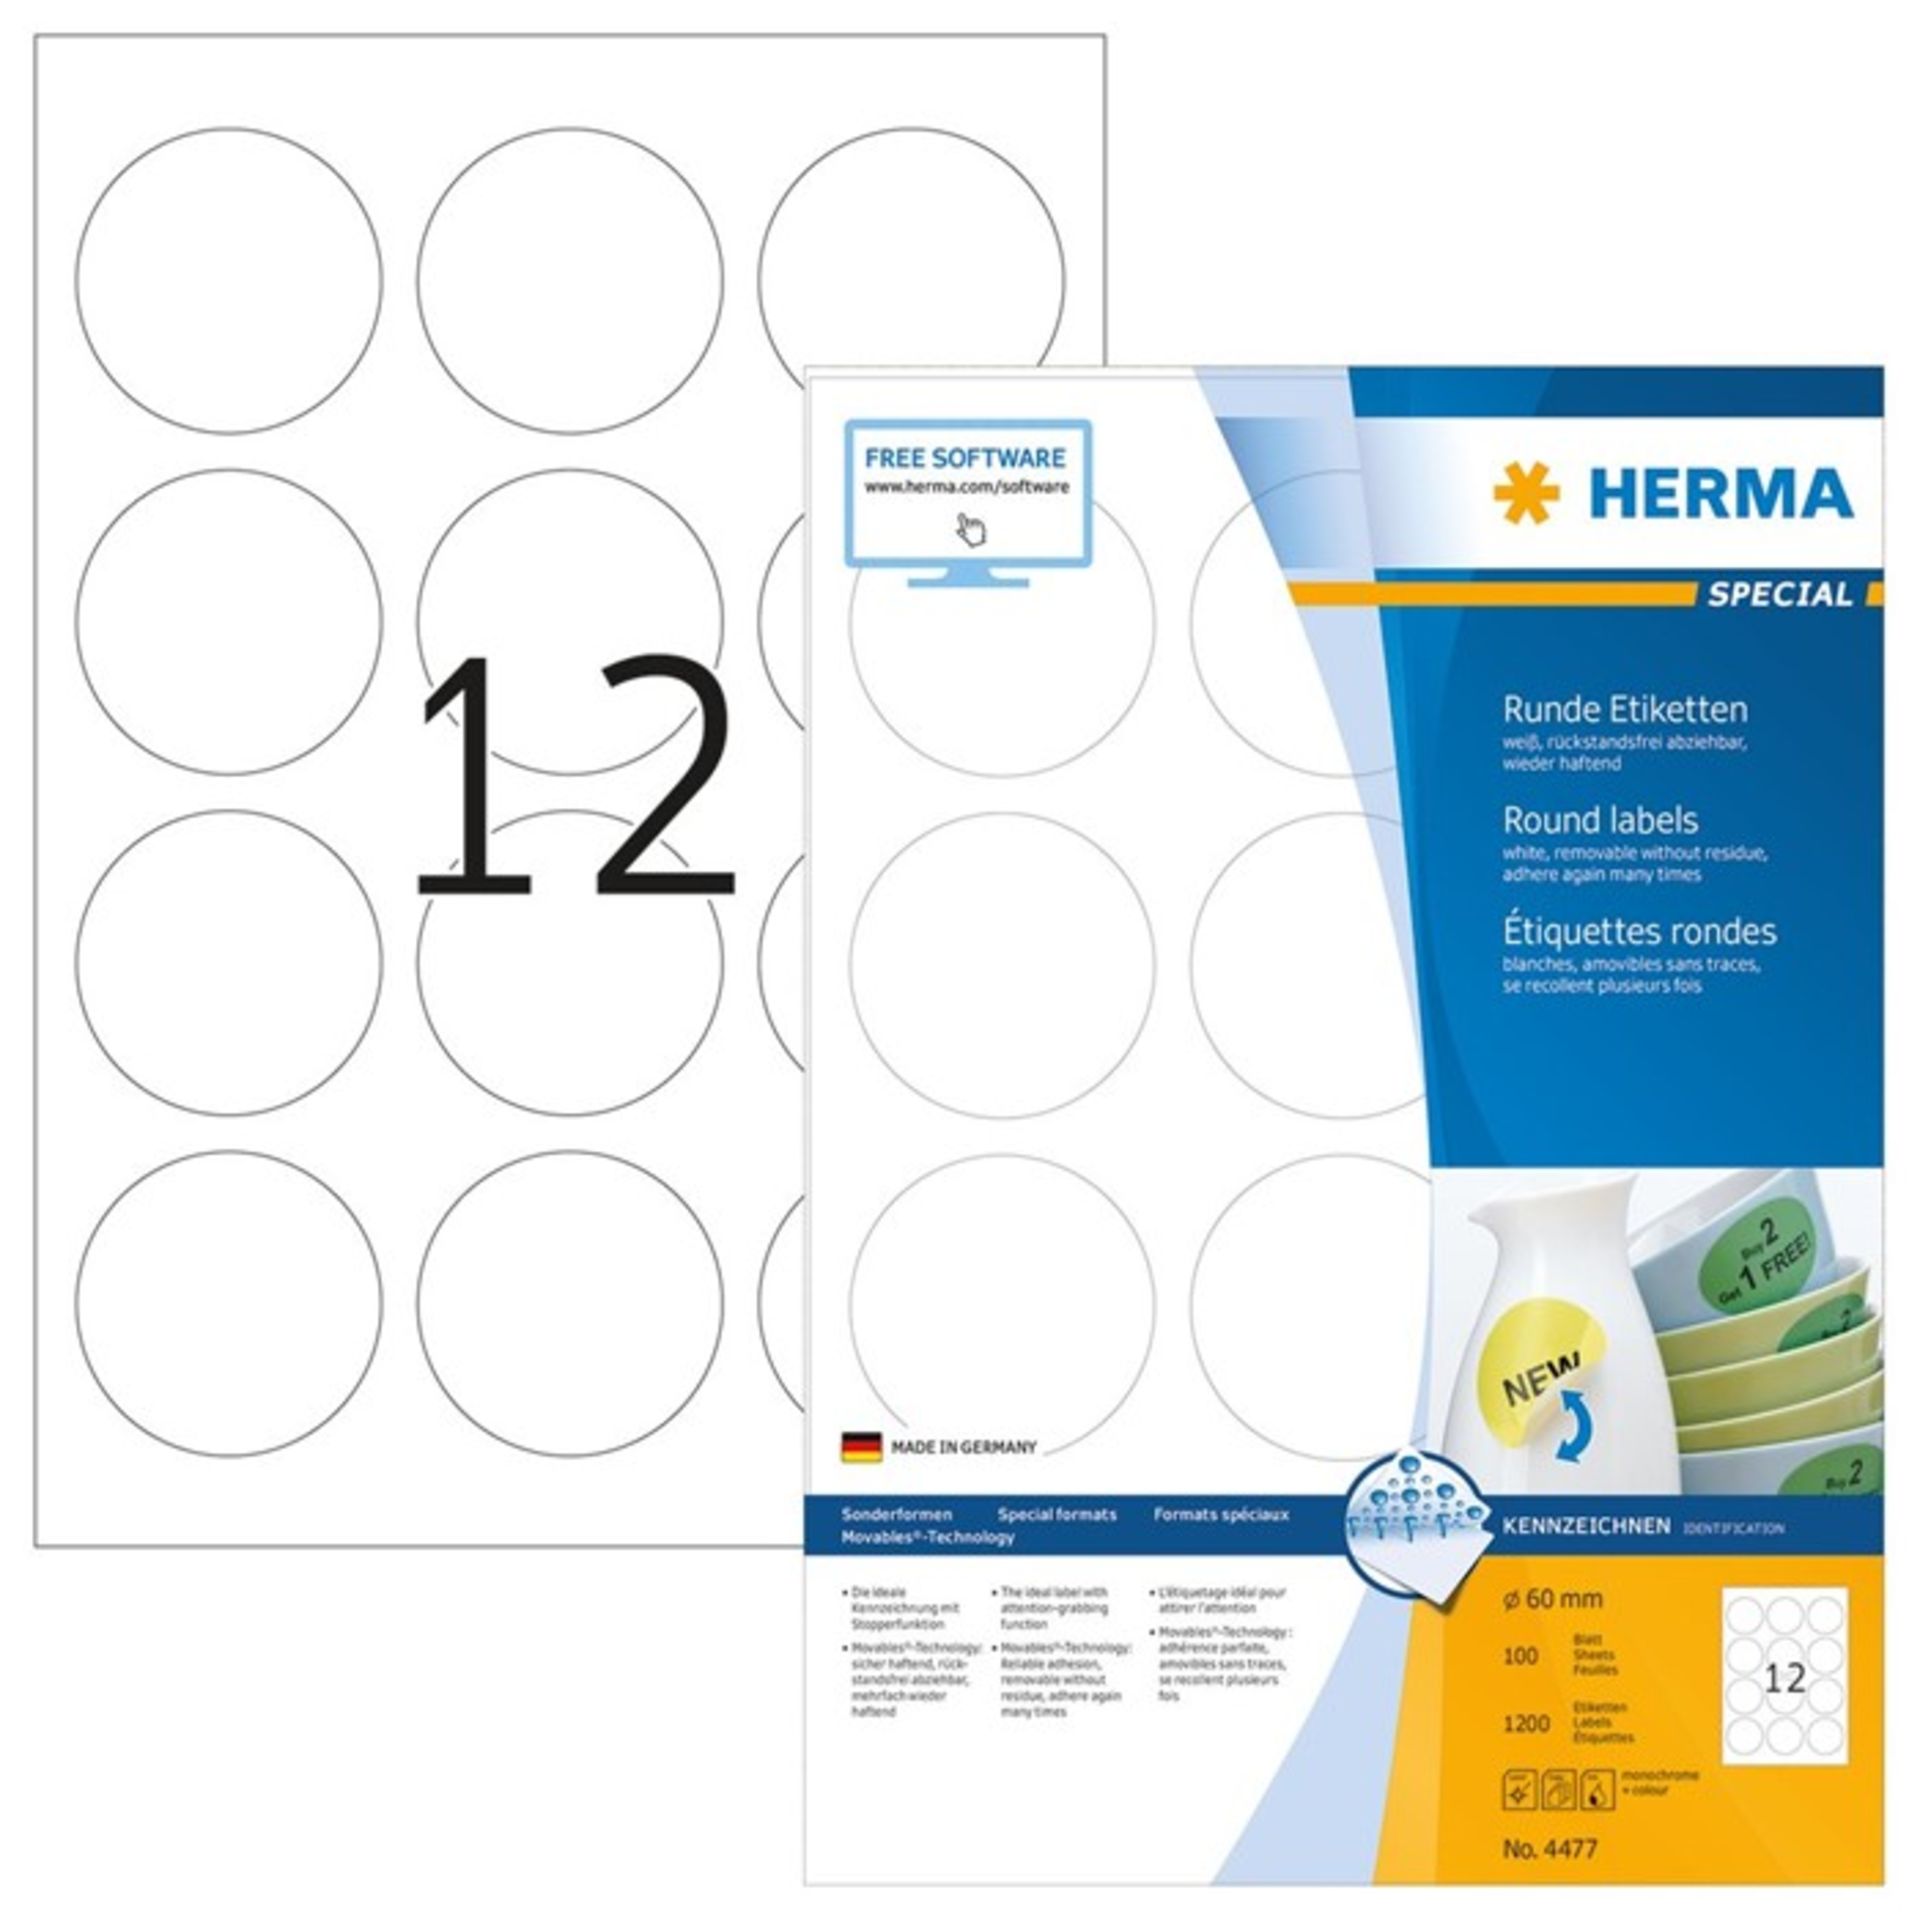 1 AS NEW BOXED HERMA REMOVABLE 60MM ROUND LABELS IN WHITE / 1200 PIECES / PN - NPN / RRP £28.90 (